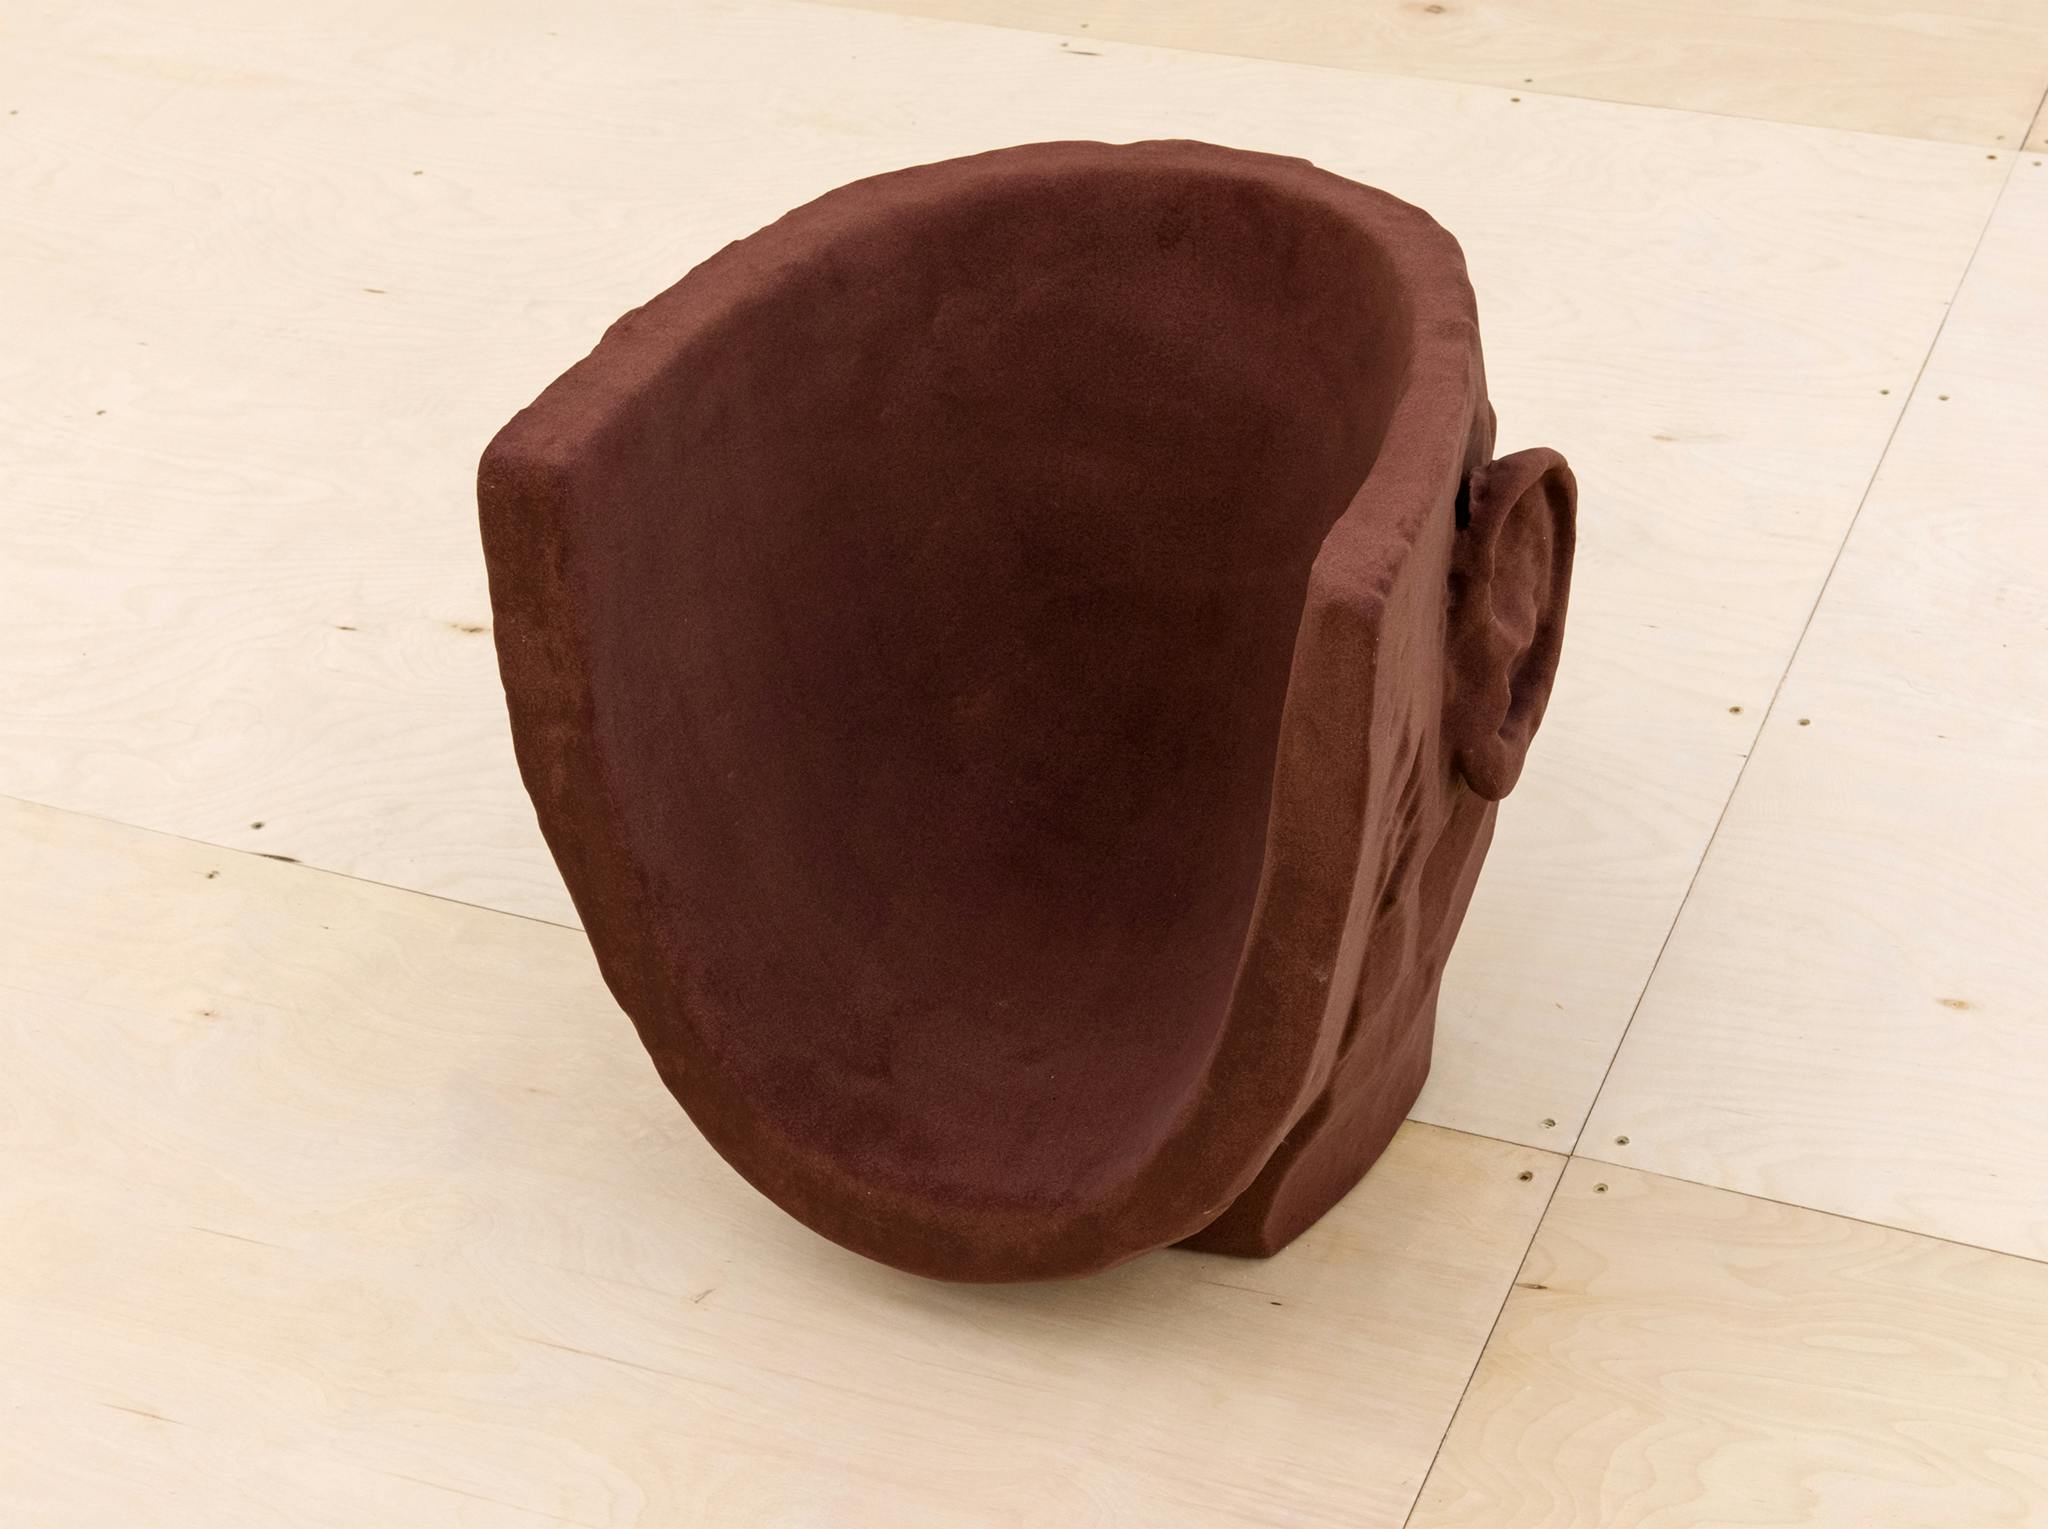 A brown sculpture resembling a human head is installed on a gallery floor. It is faceless, and hollowed out, making the sculpture look like a low chair. 